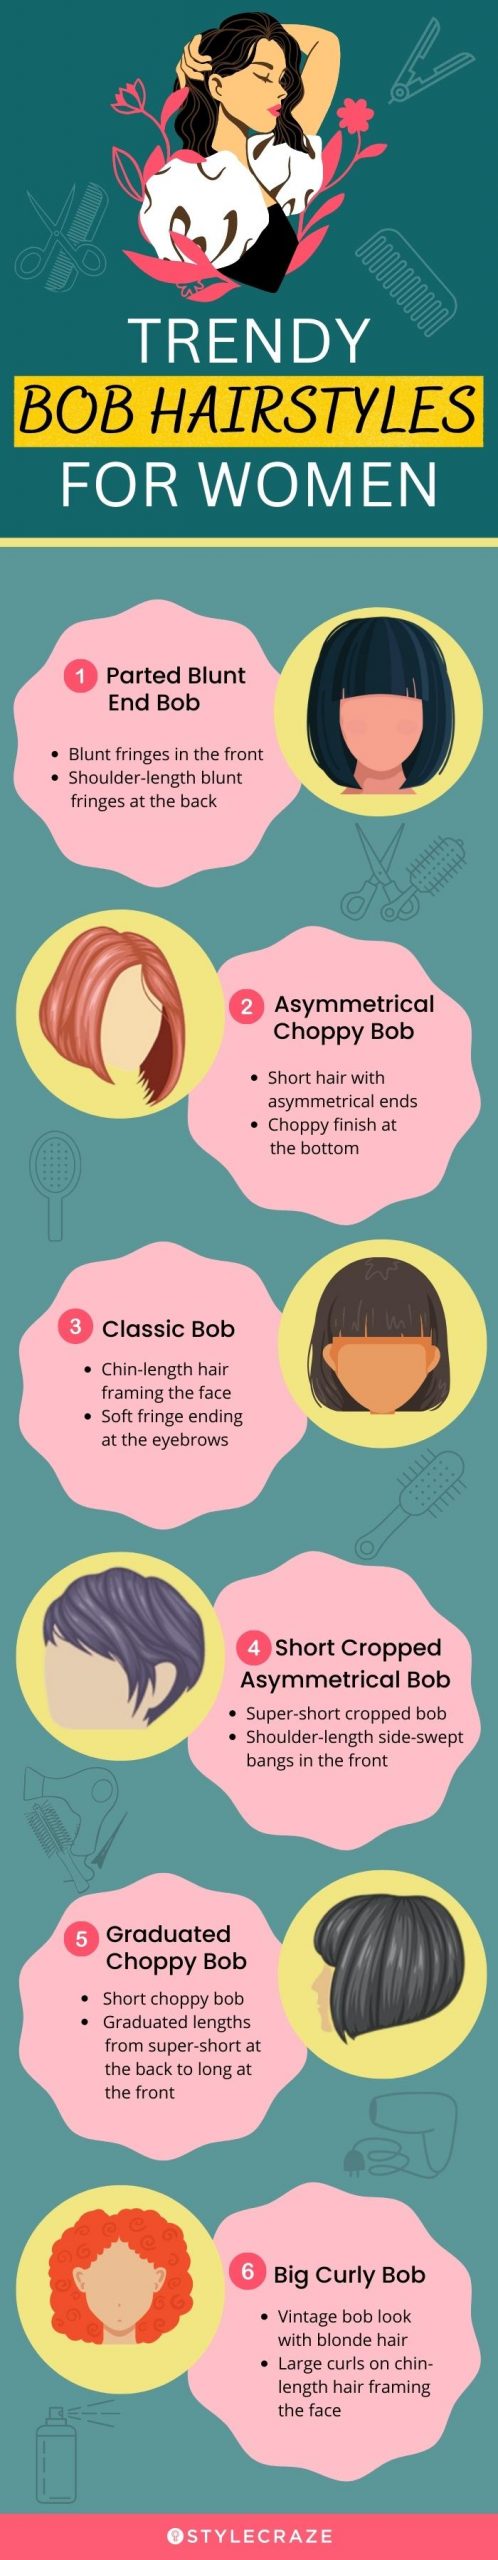 trendy bob hairstyles for women (infographic)